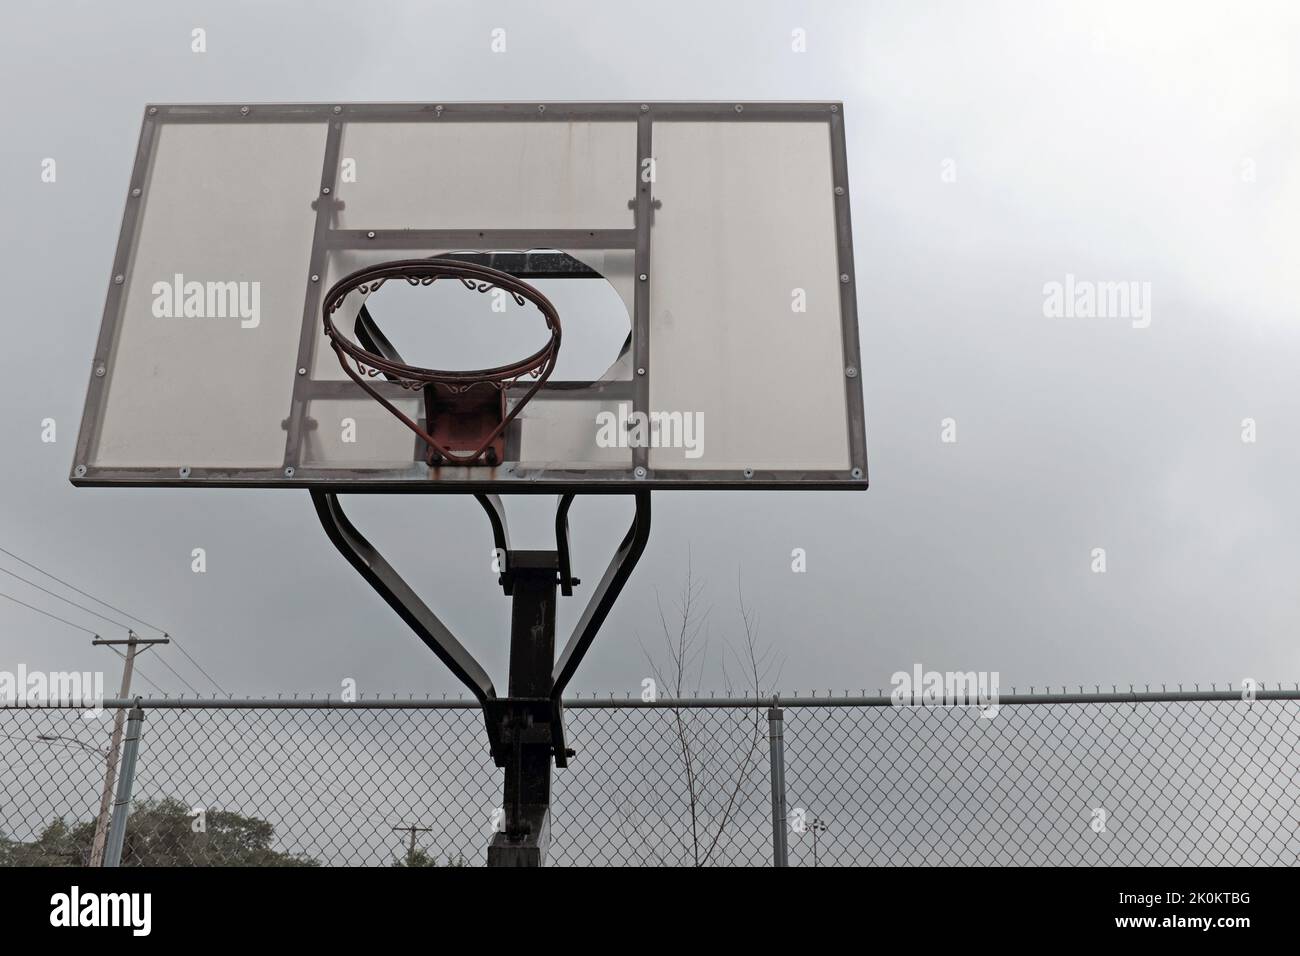 A dilapidated basketball hoop without net and broken backboard sit neglected on a playground. Stock Photo